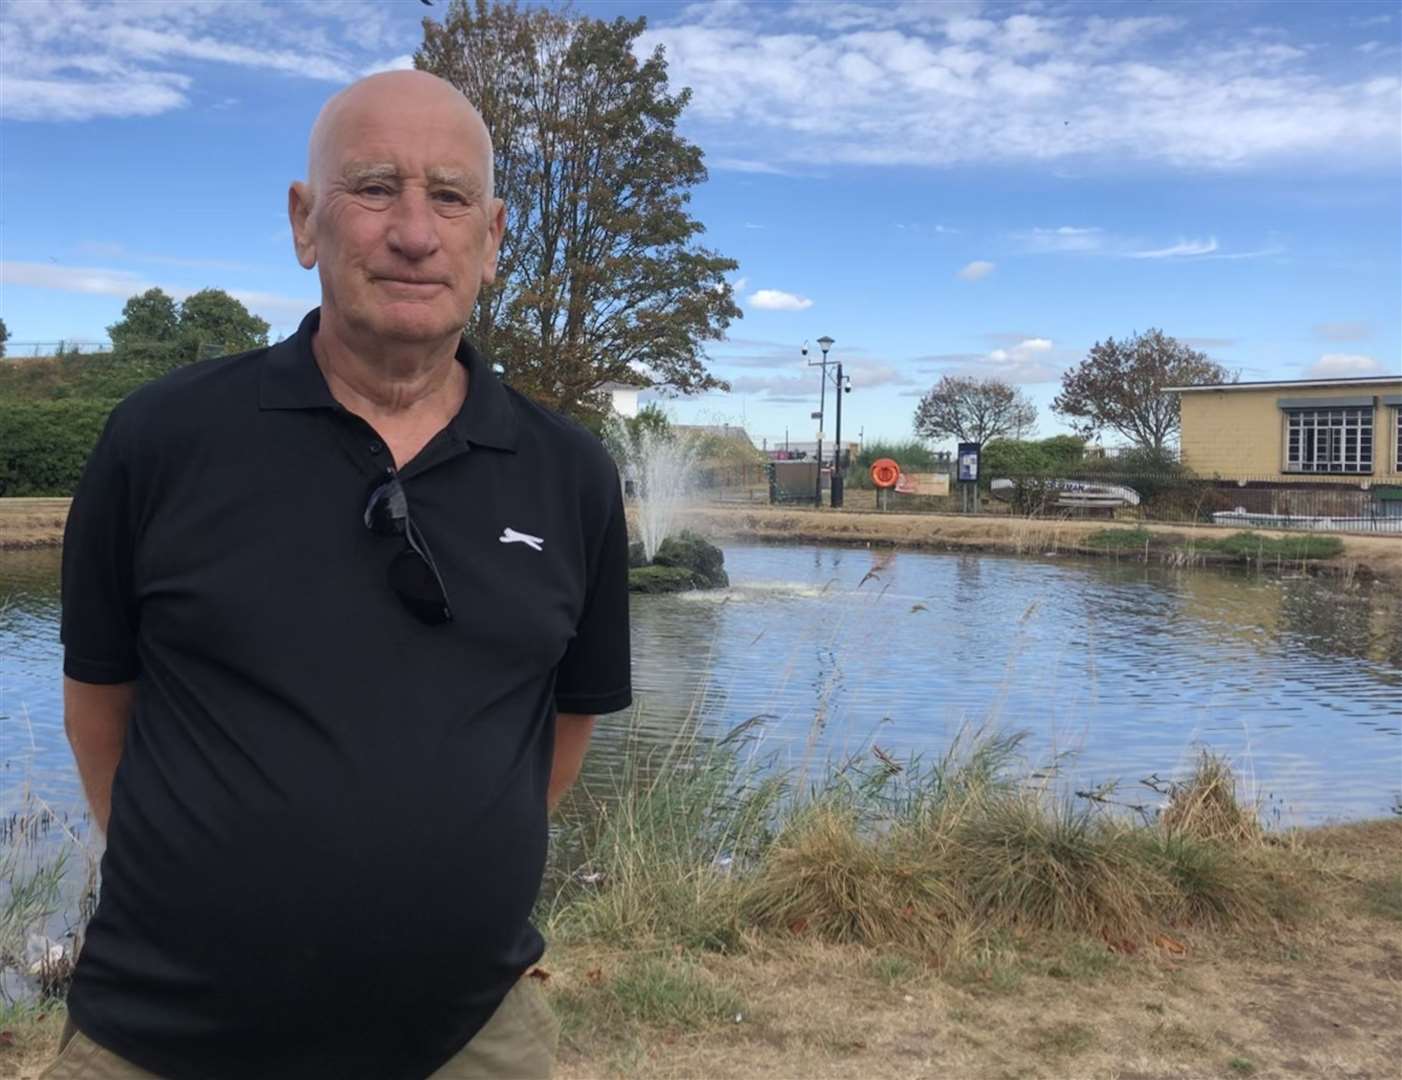 Brian Palmer raised the issue of litter seeping into the lake